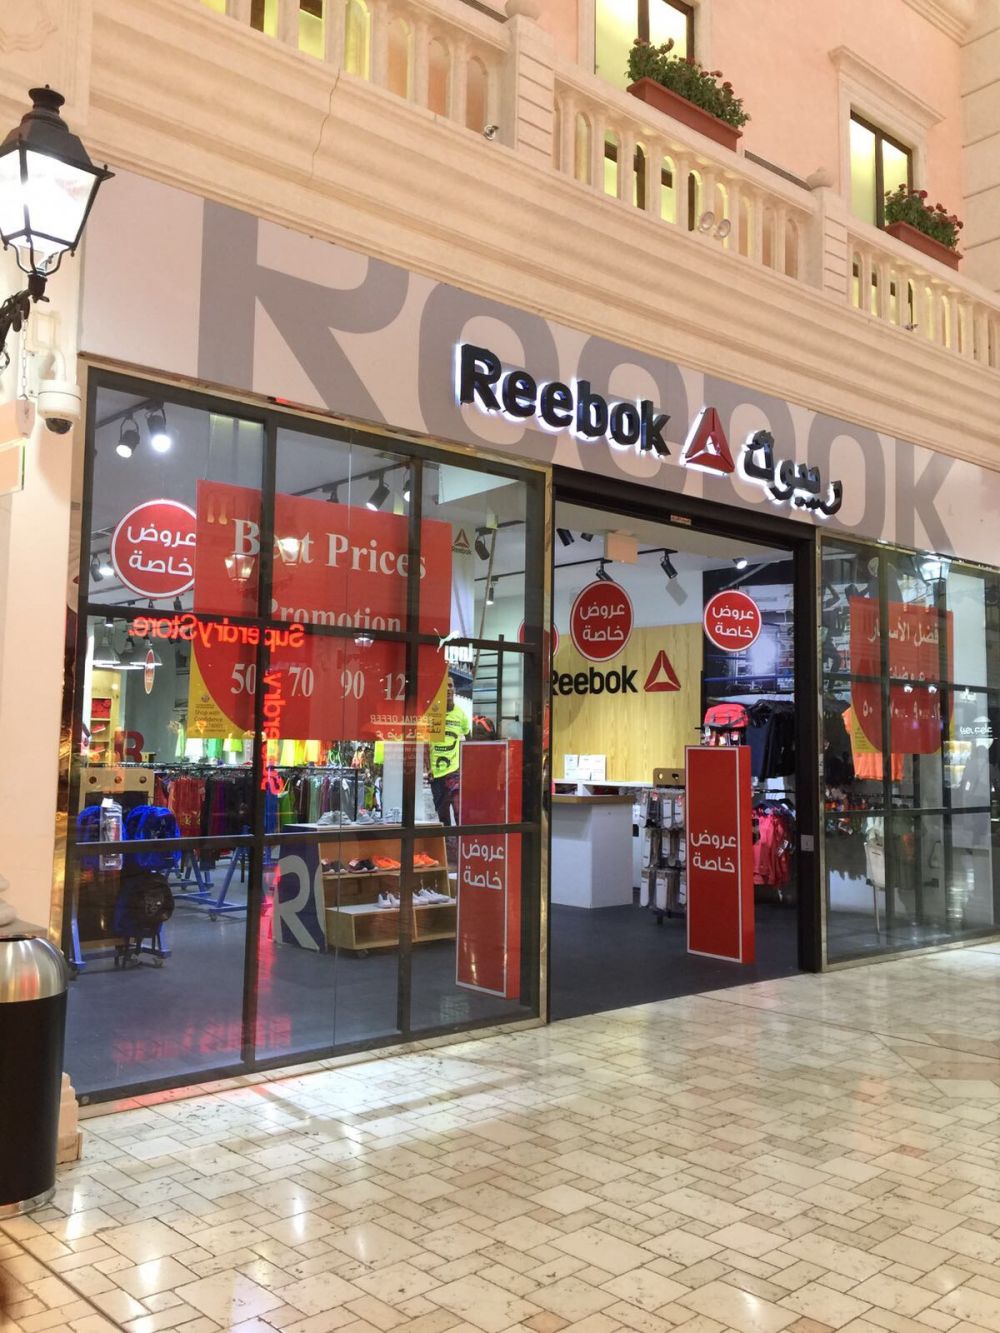 Sale Up To  50% Off - Reebok